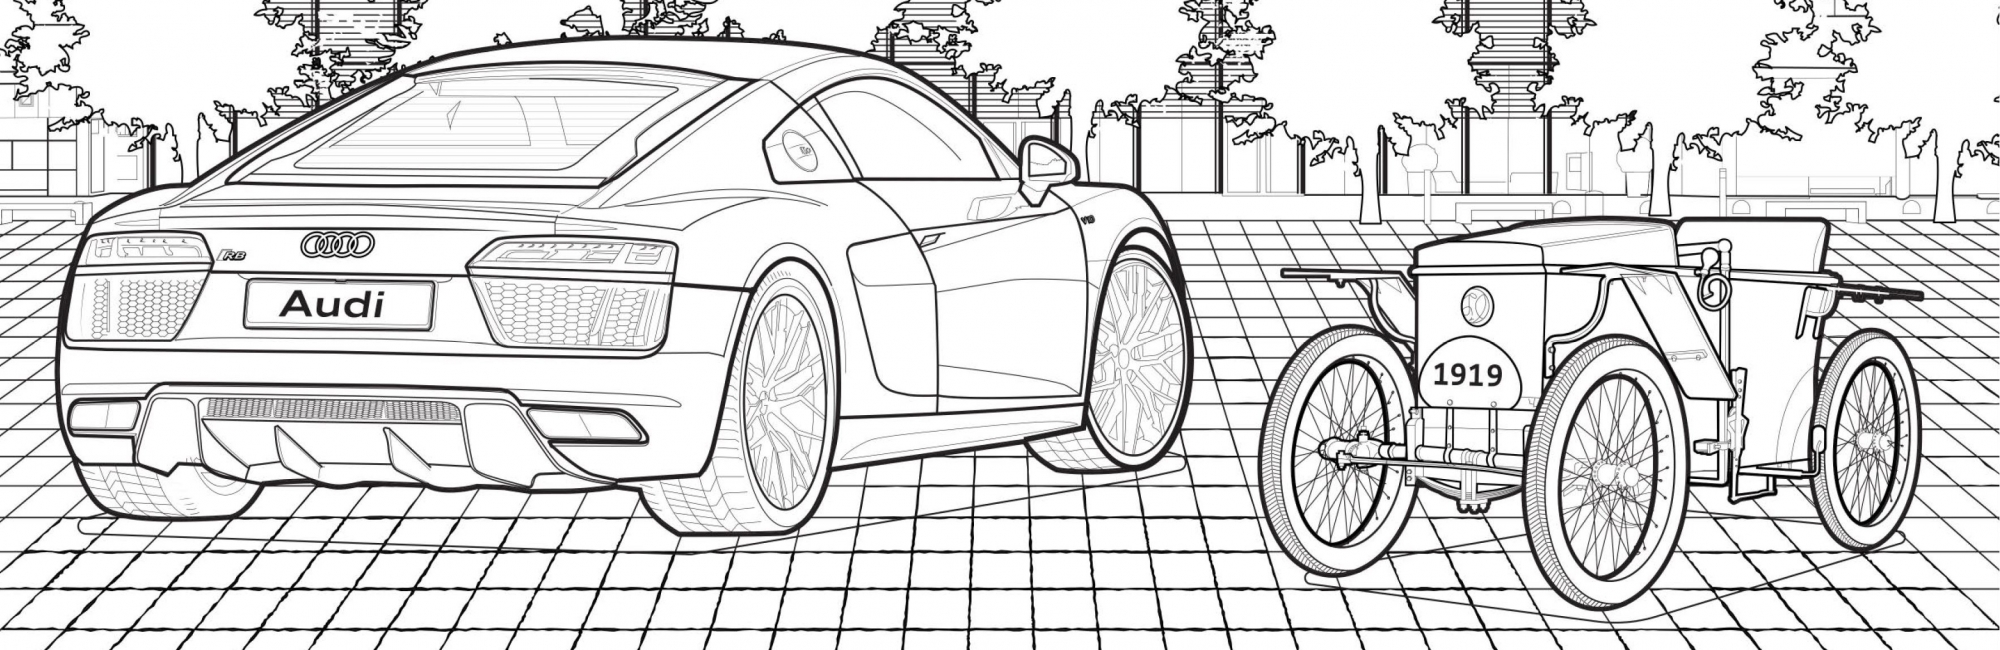 Download Quarantine Got You Down Check Out Audi S Free Coloring Book Or Tour A Virtual Car Museum Carscoops